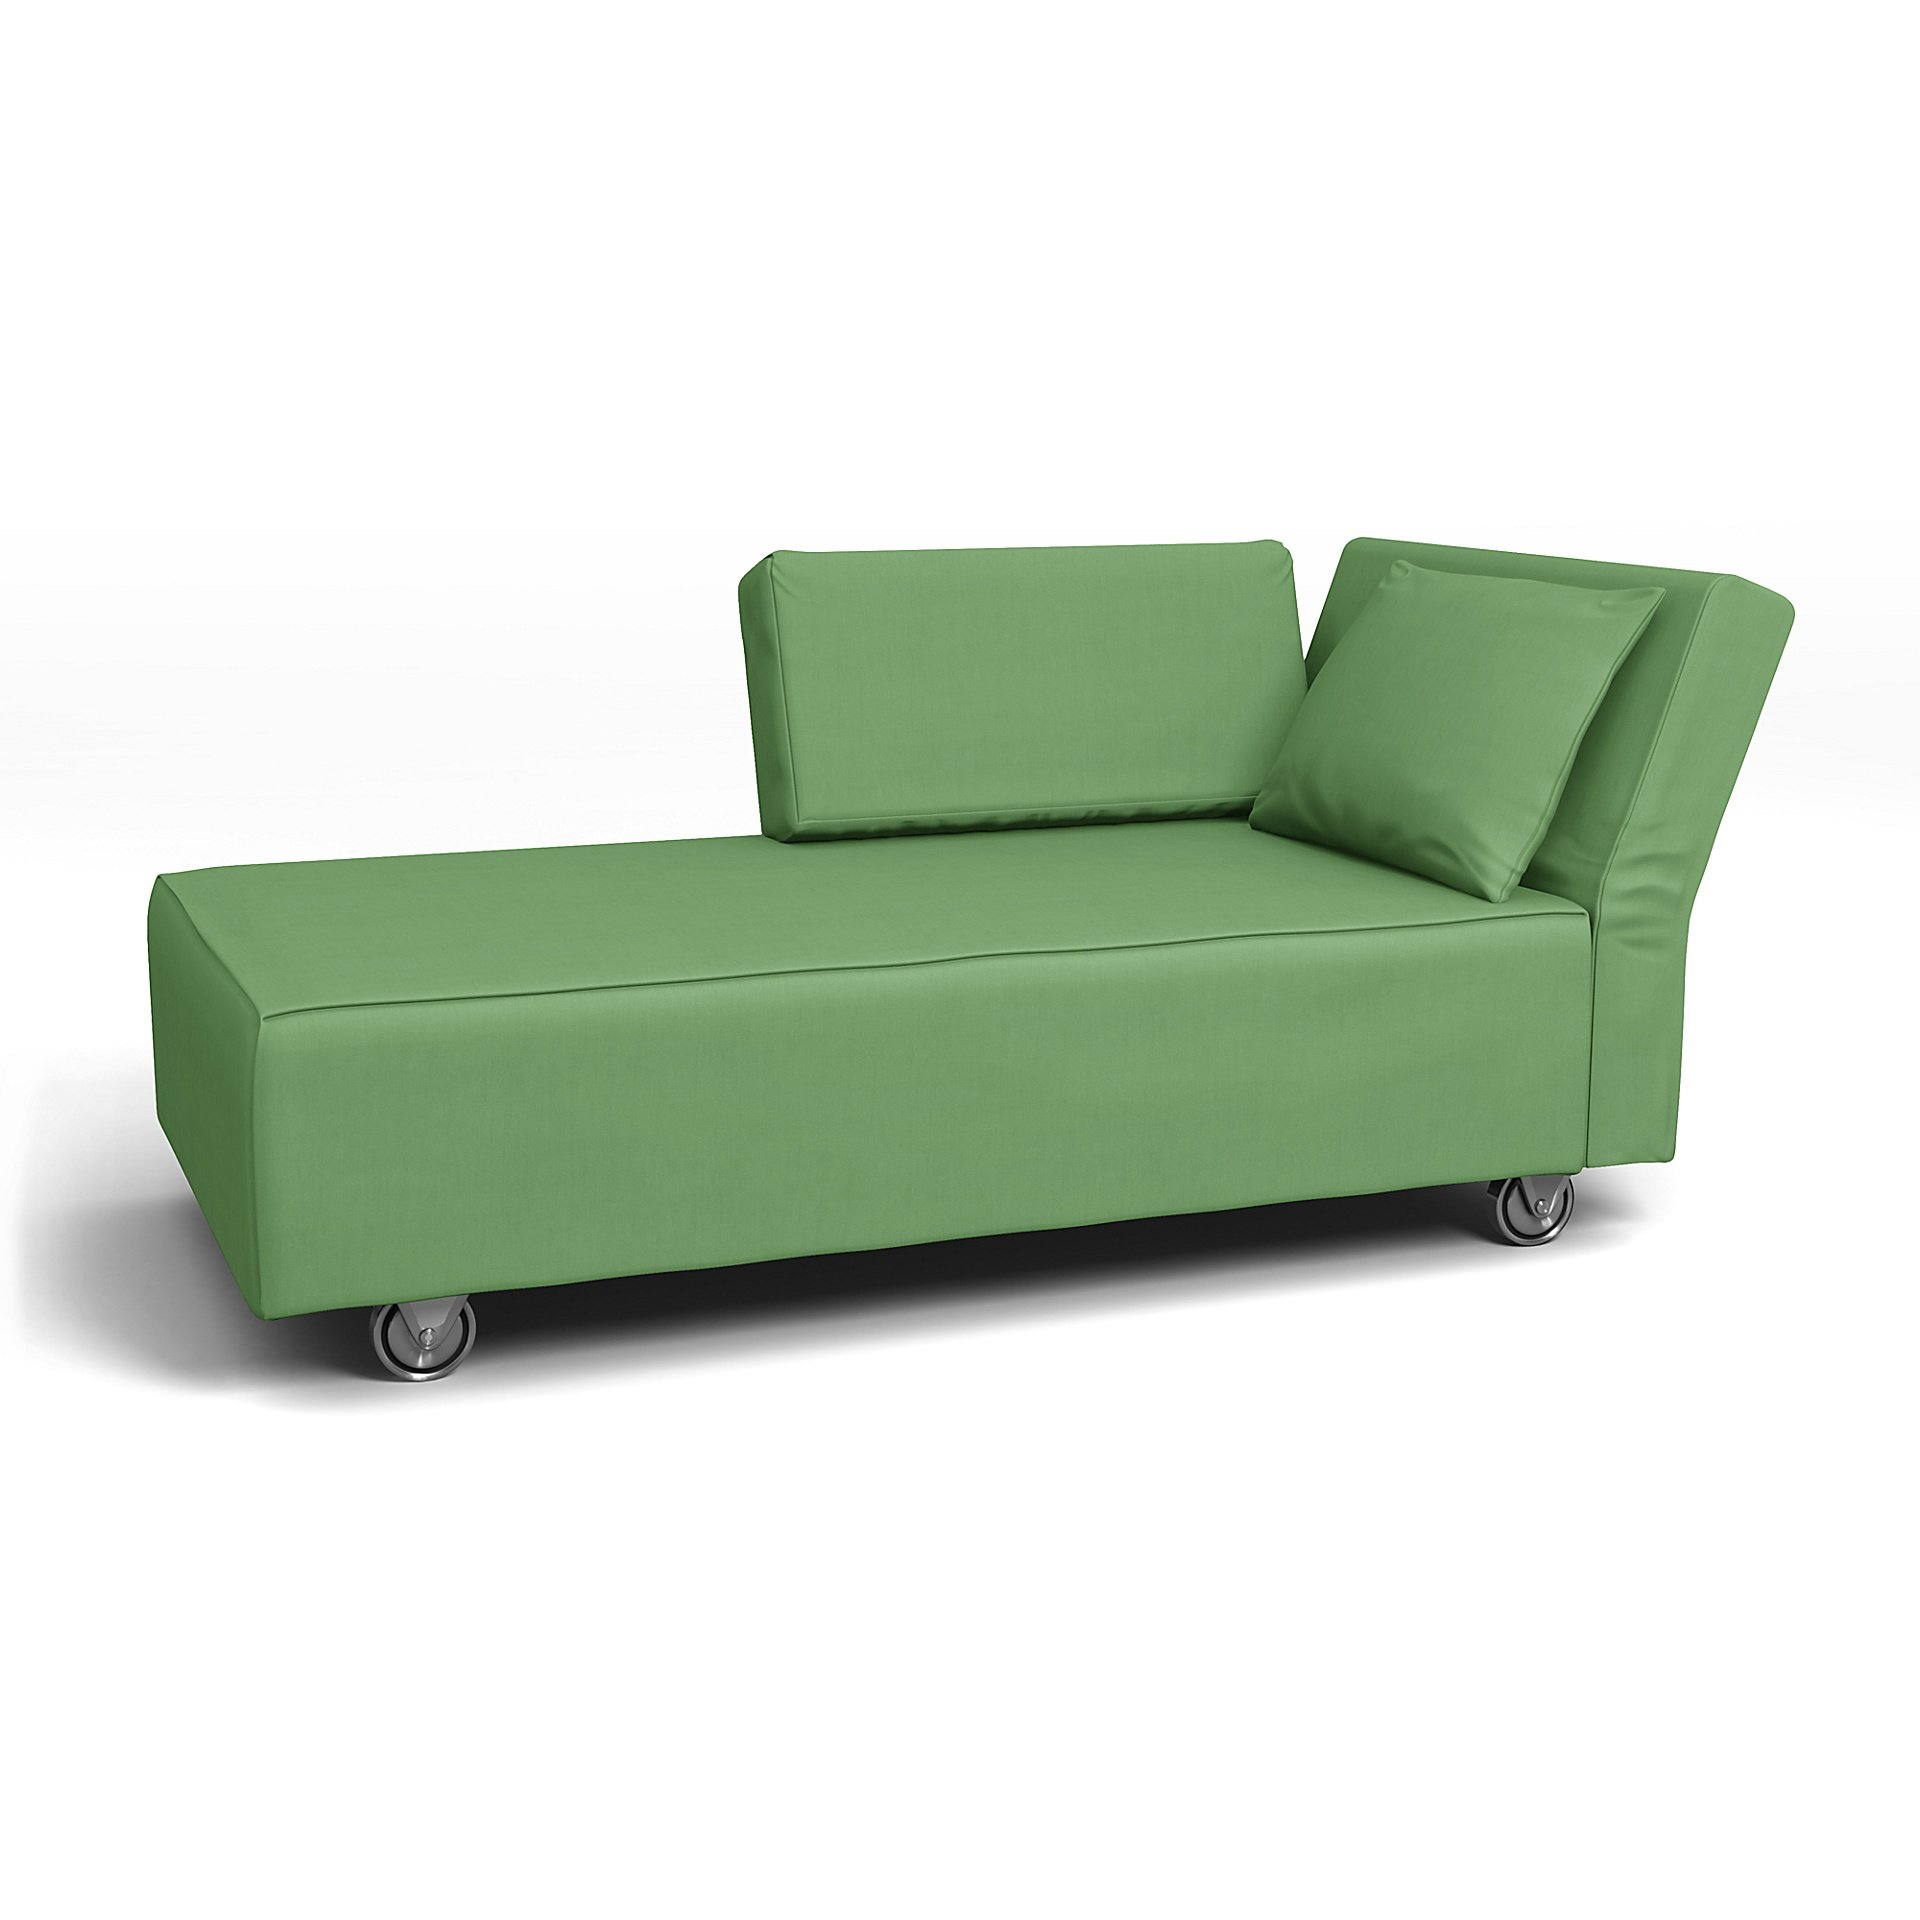 IKEA - Falsterbo Chaise with Right Armrest Cover, Apple Green, Linen - Bemz